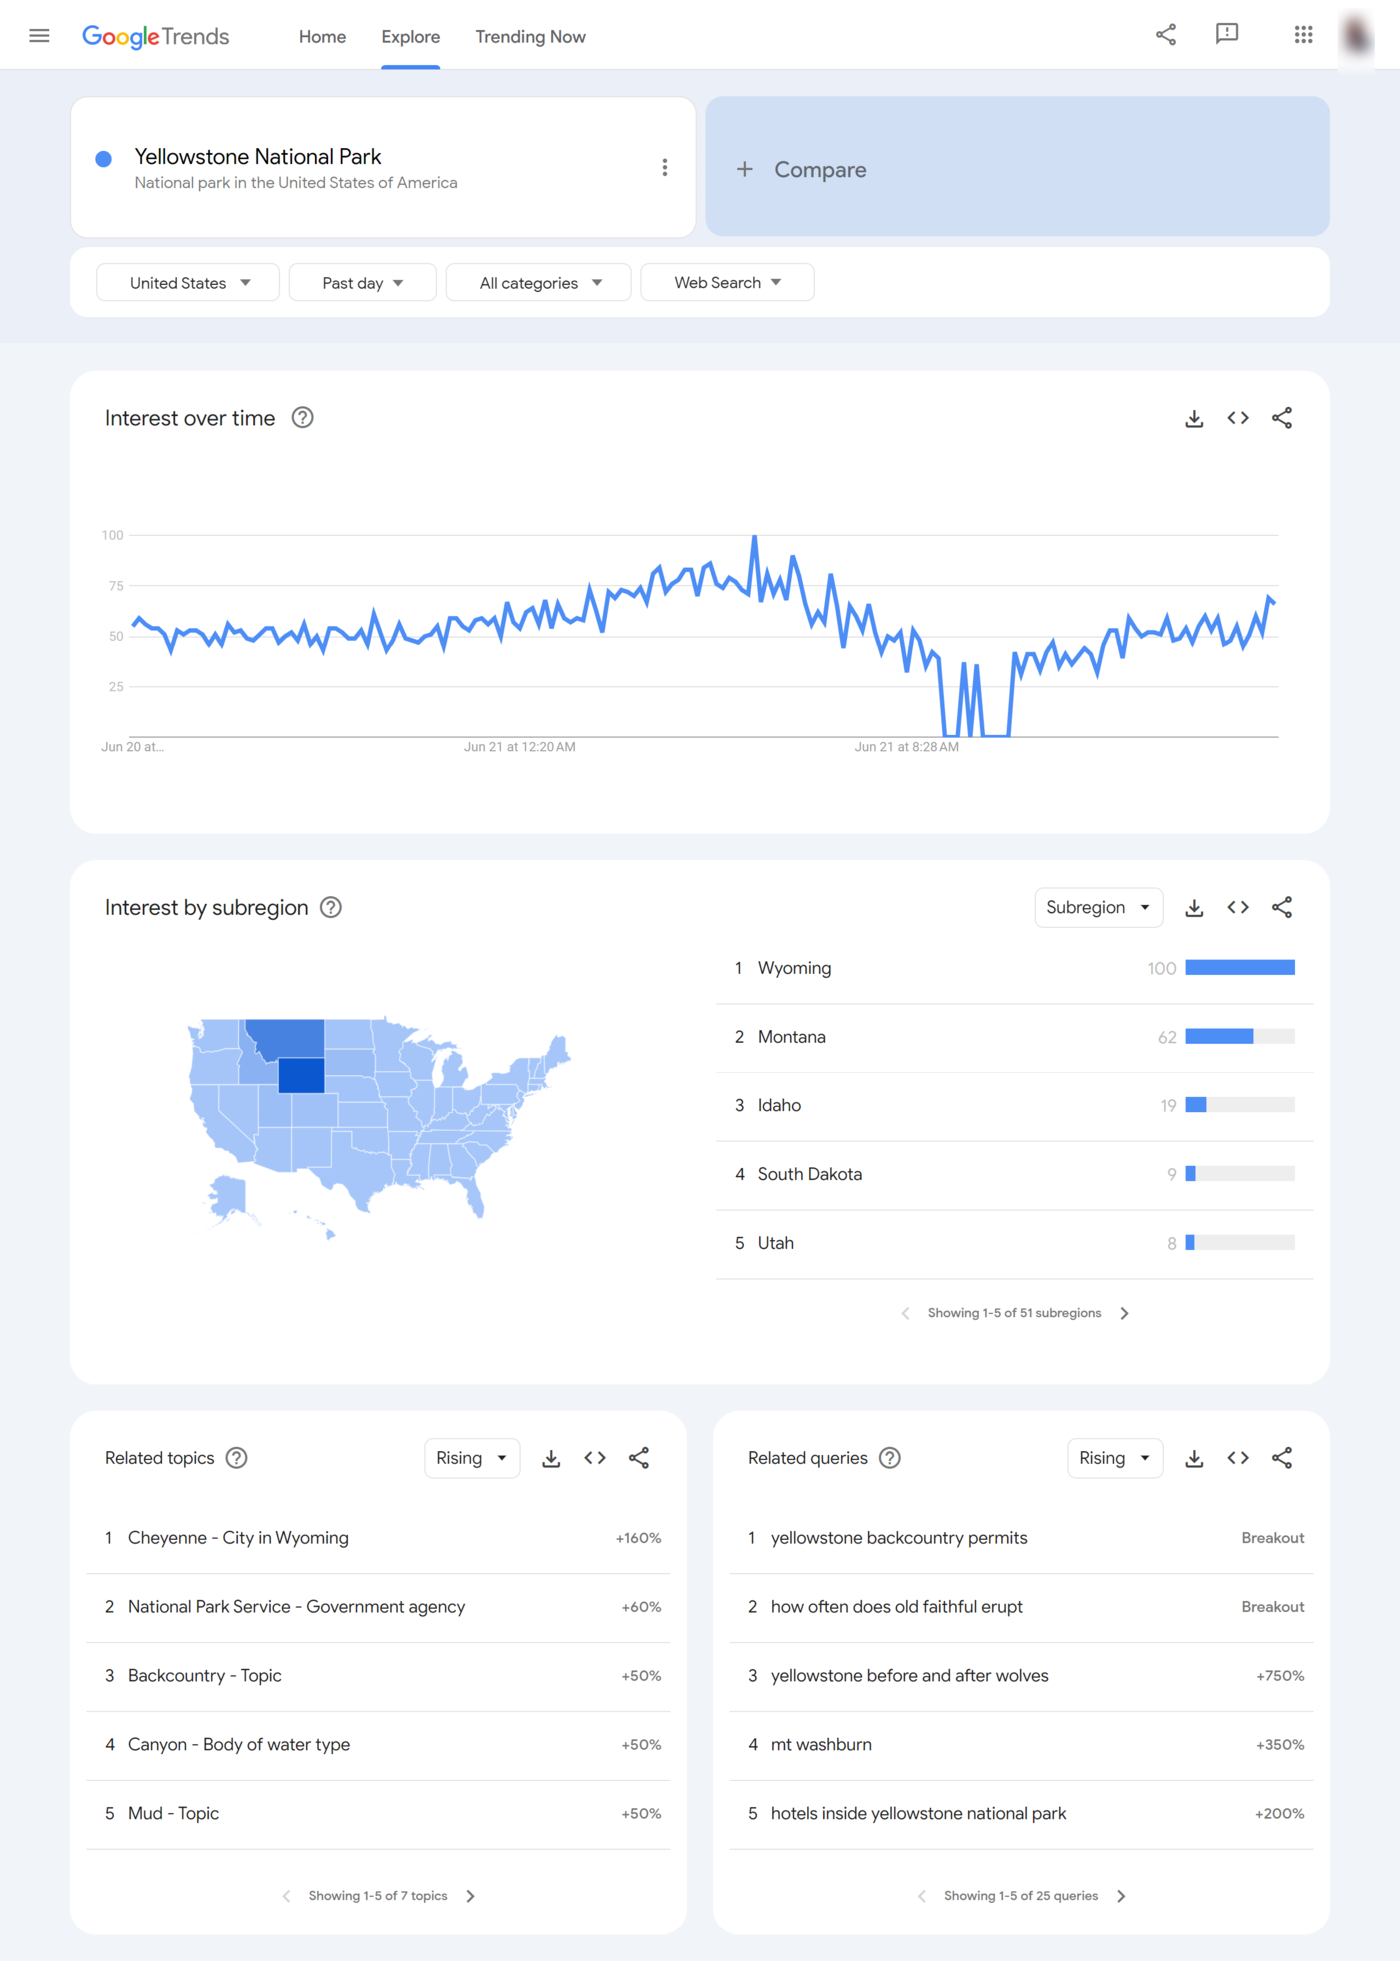 Sample of the Google Trends page